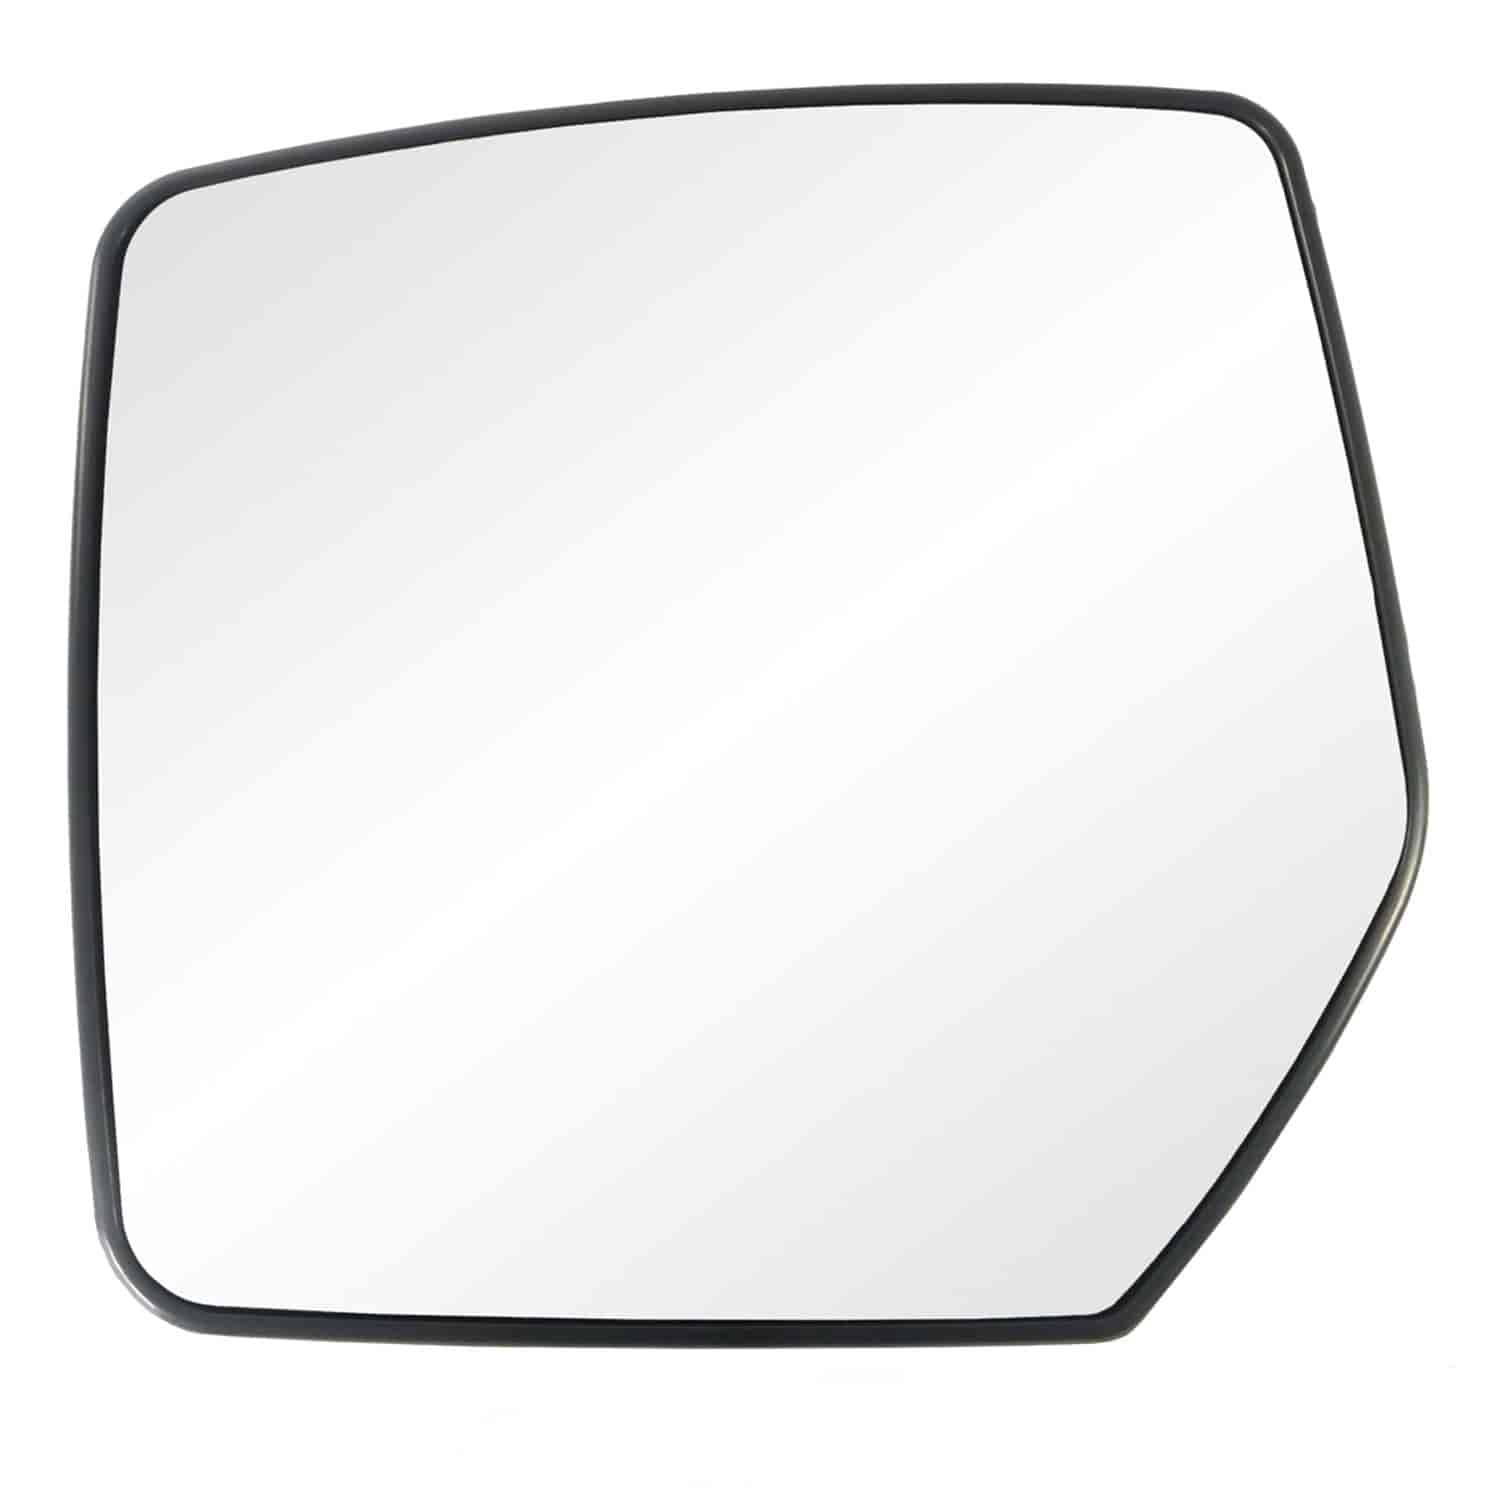 Replacement Glass Assembly for 07-11 Nitro replace your cracked or broken driver side mirror glass a